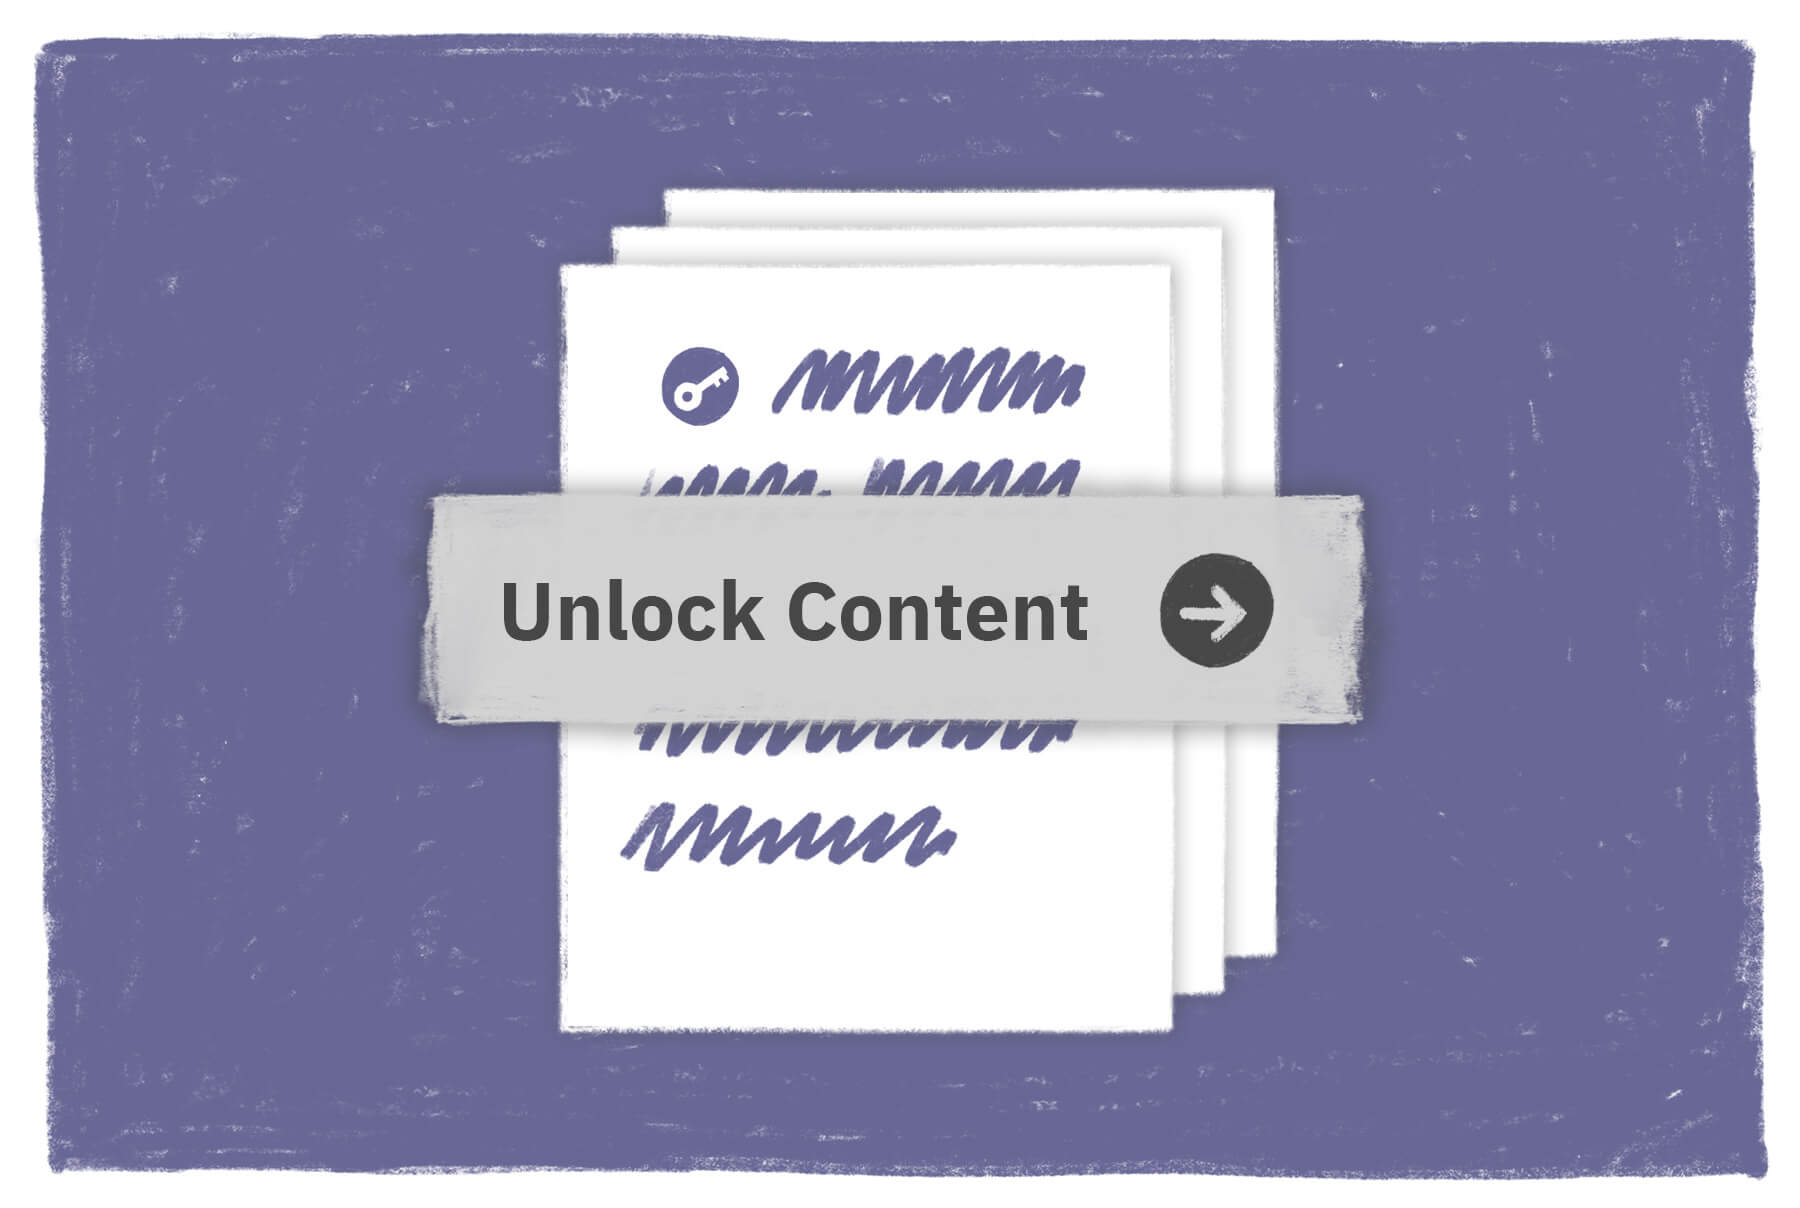 Introducing the Latest Unlock Paywall